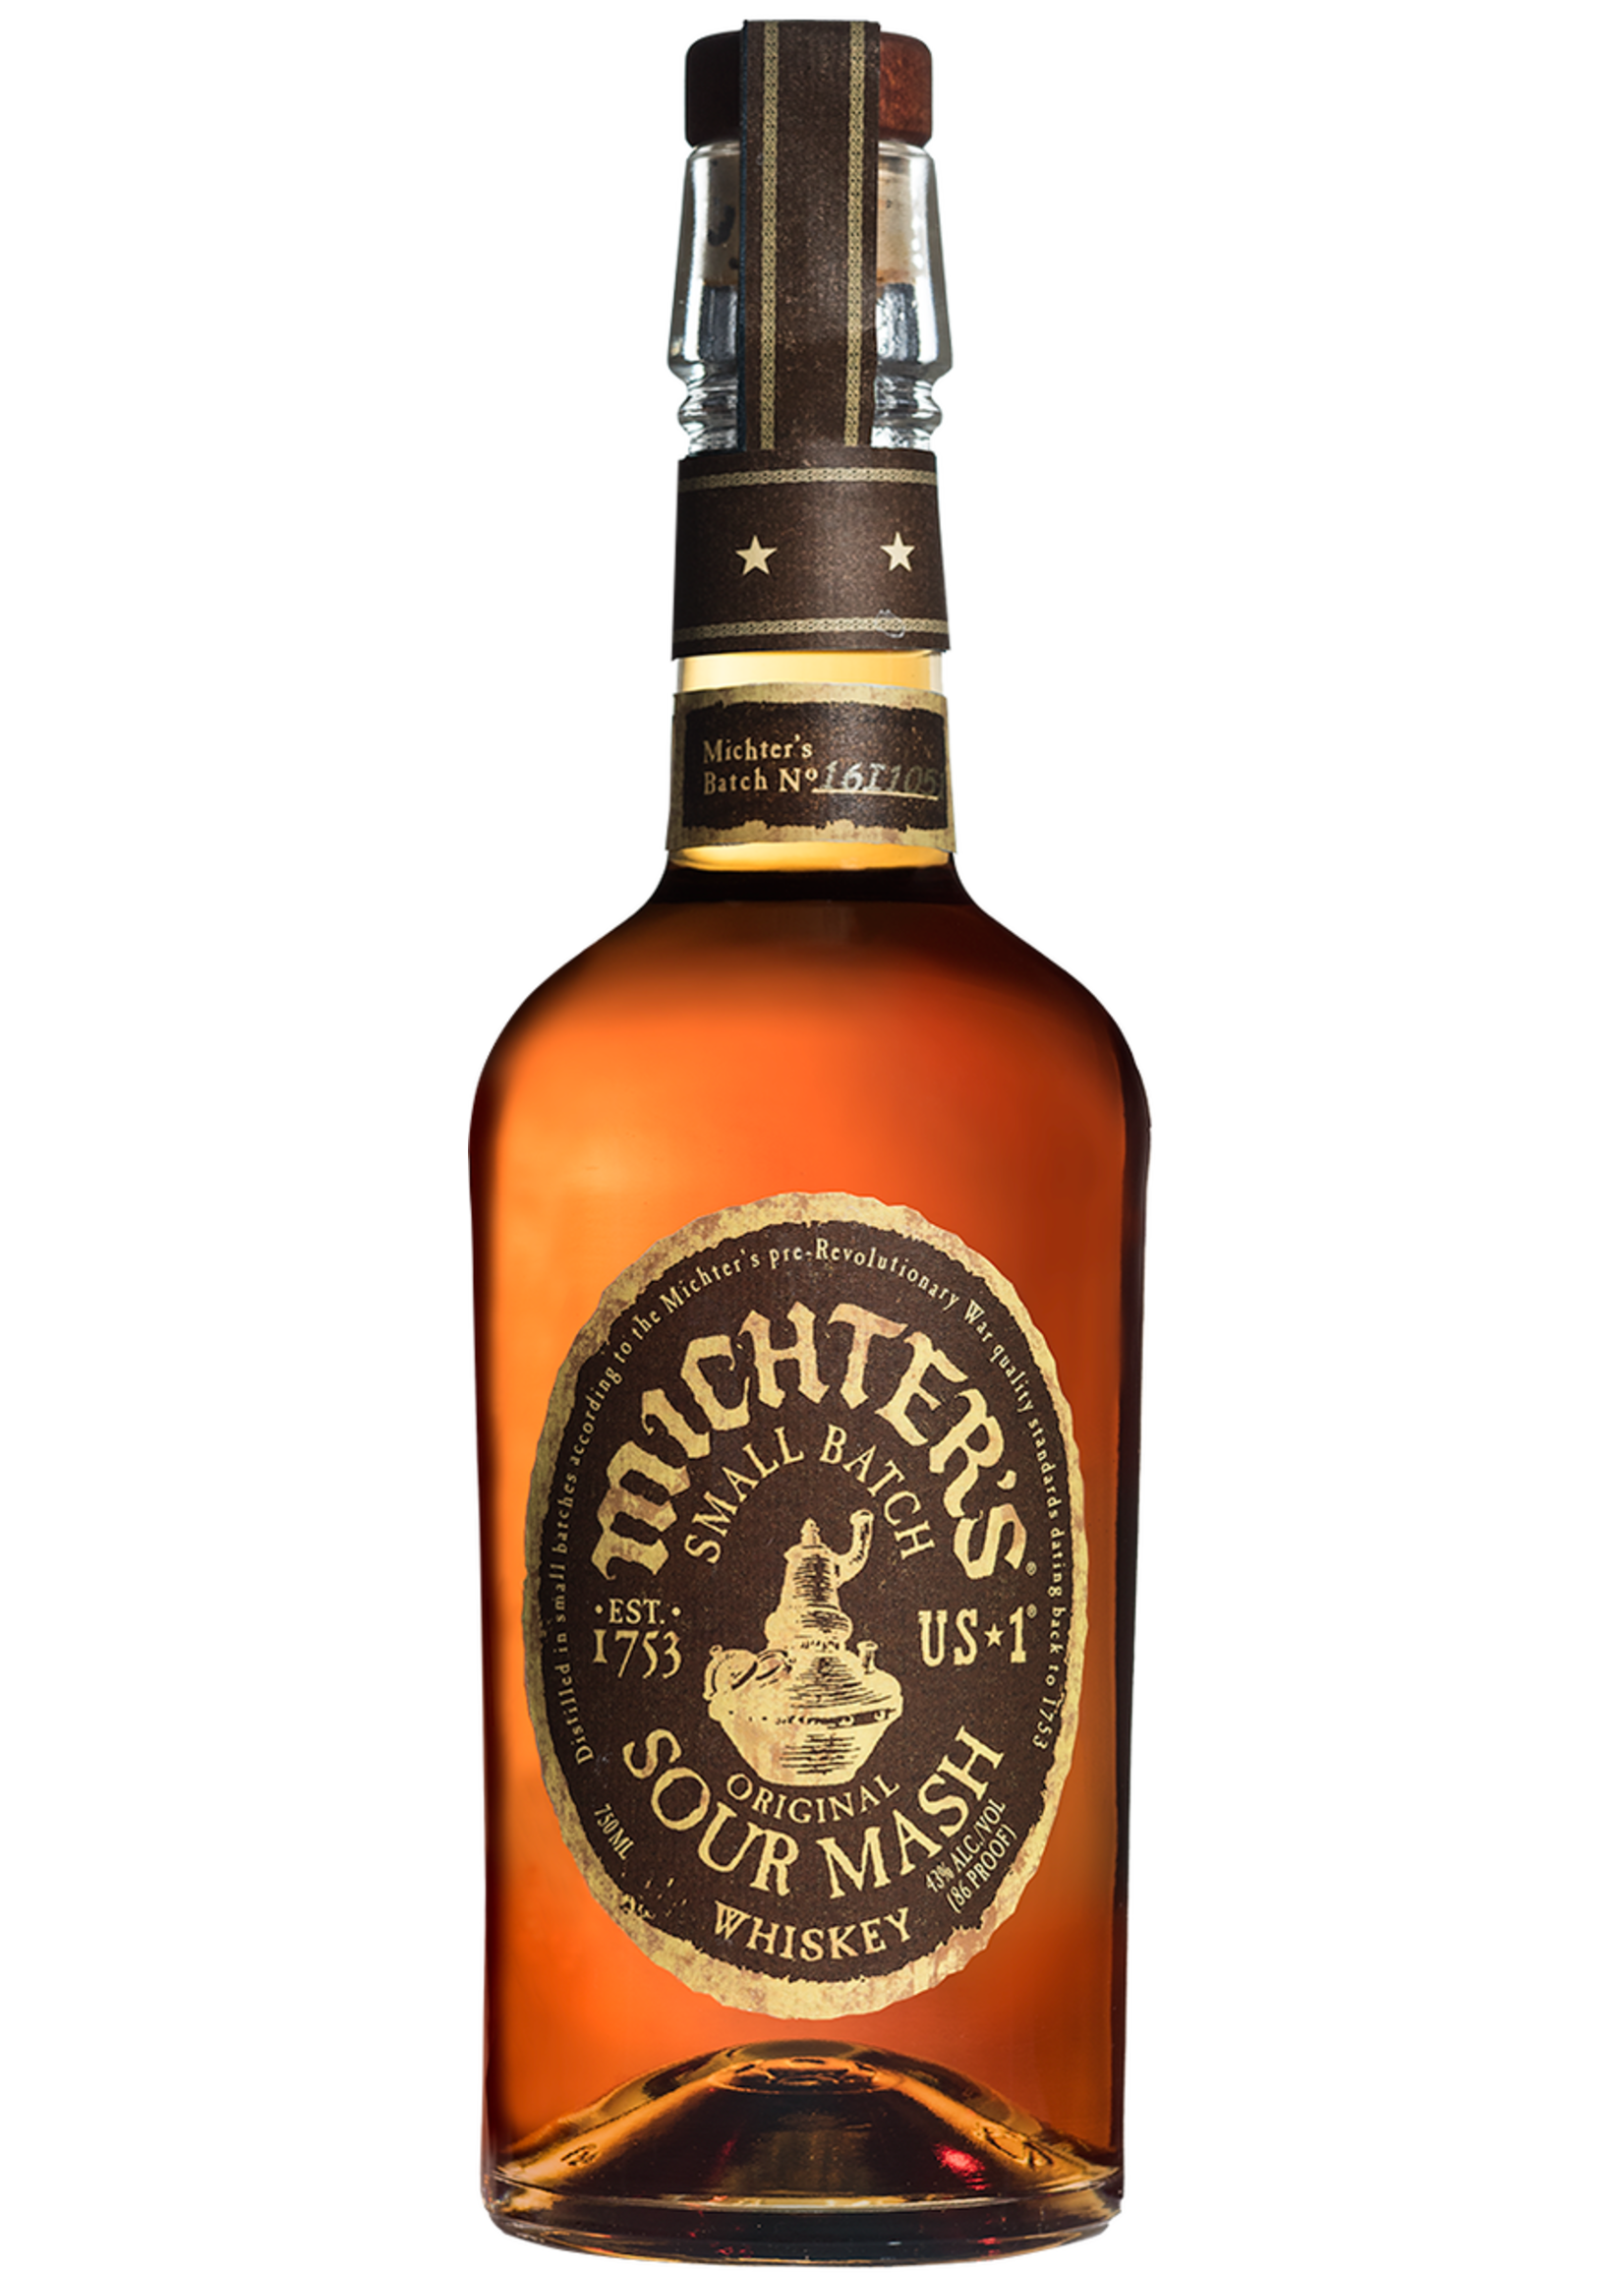 Michter's Michter's /  US*1 Small Batch Sour Mash Whiskey 43% abv / 750mL